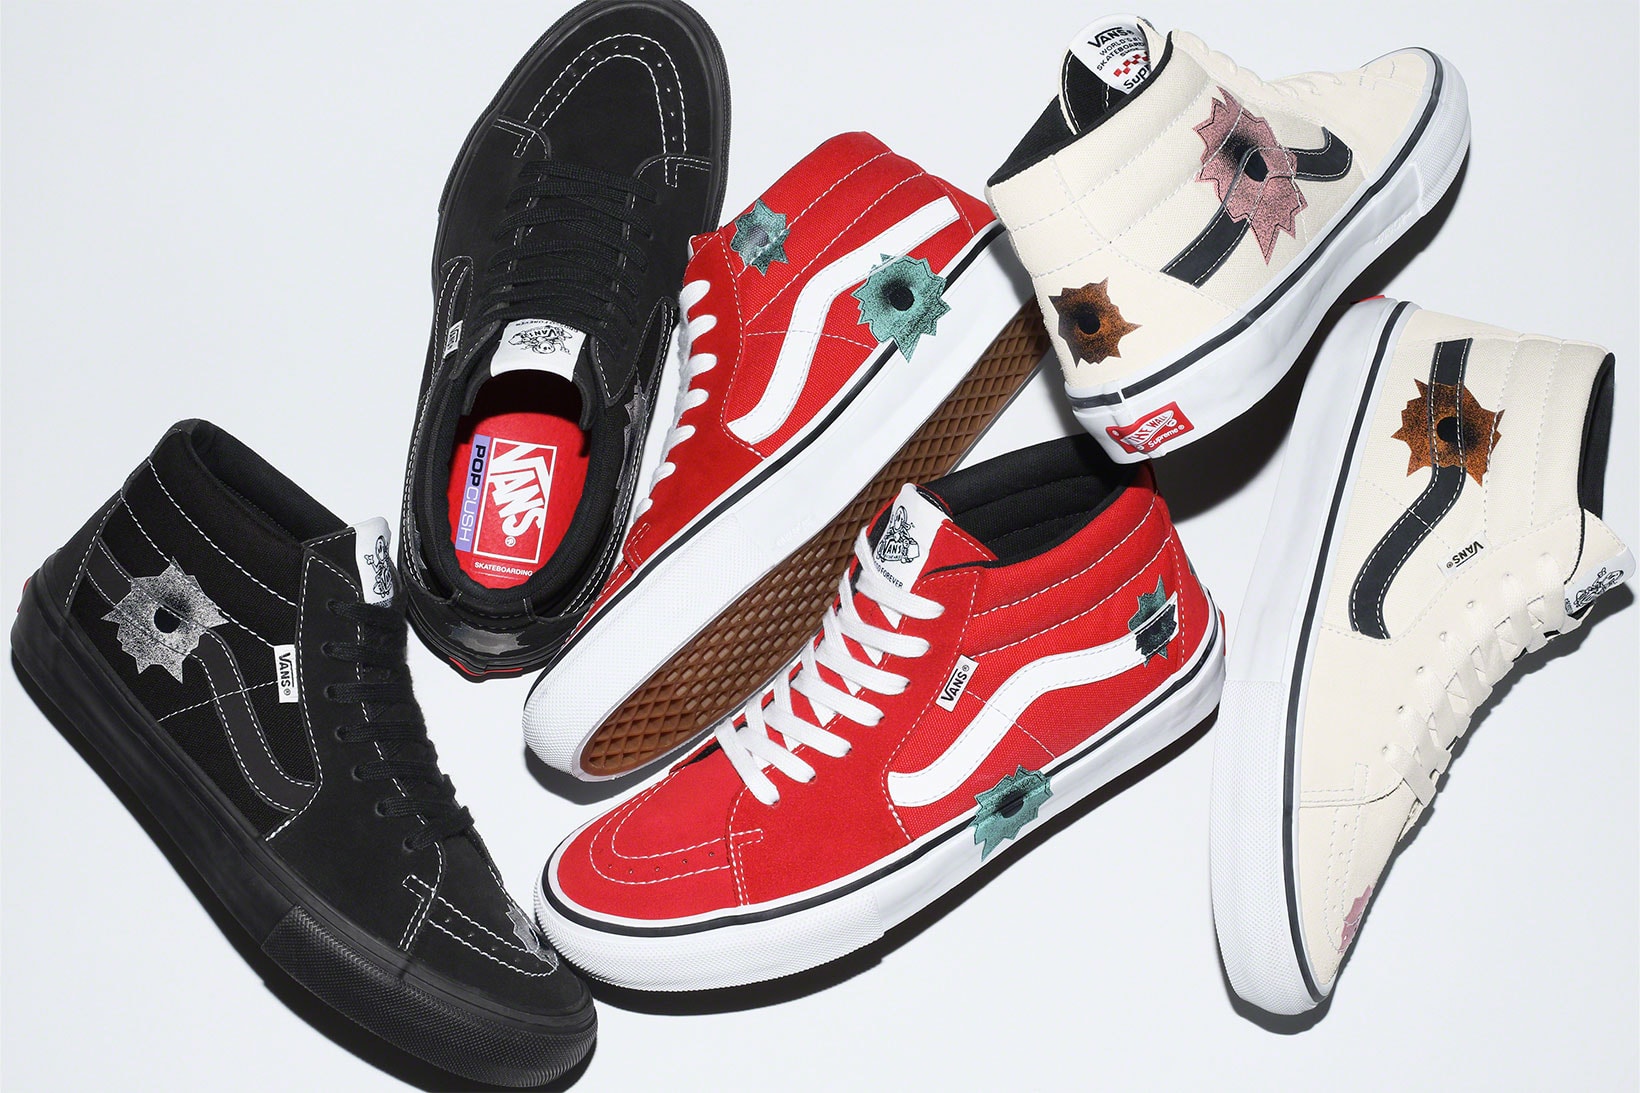 Supreme x Vans Skate Grosso Mid by Nate Lowman